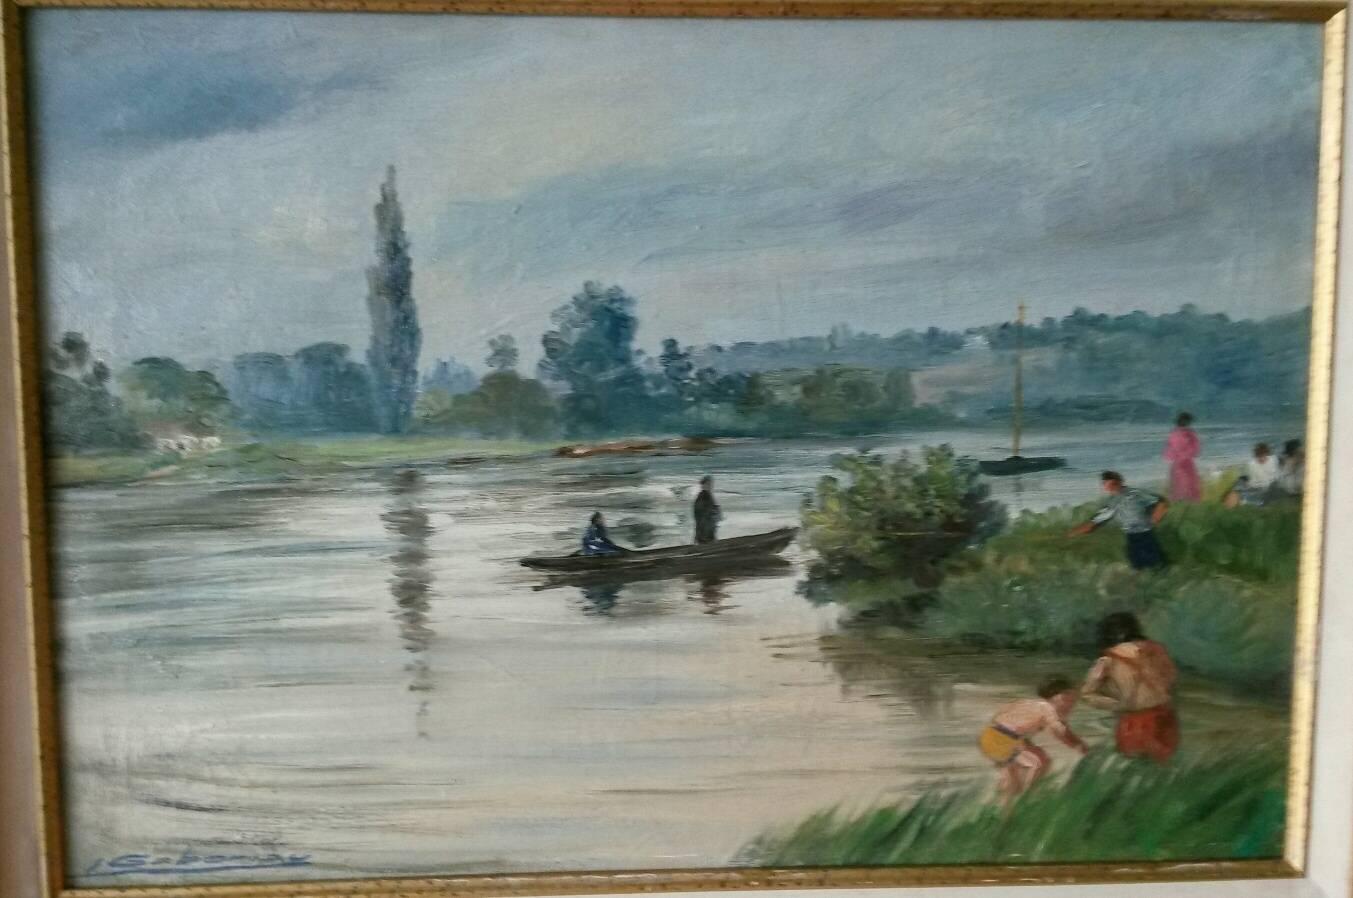 Charming French  1930's Post Impressionist landscape Oil on canvas painting in a Post Impressionist style signed  by Gaboriau representing a life scene by the Seine River banks ( written on the back : Seine et  Marne area)
In a excellent  general